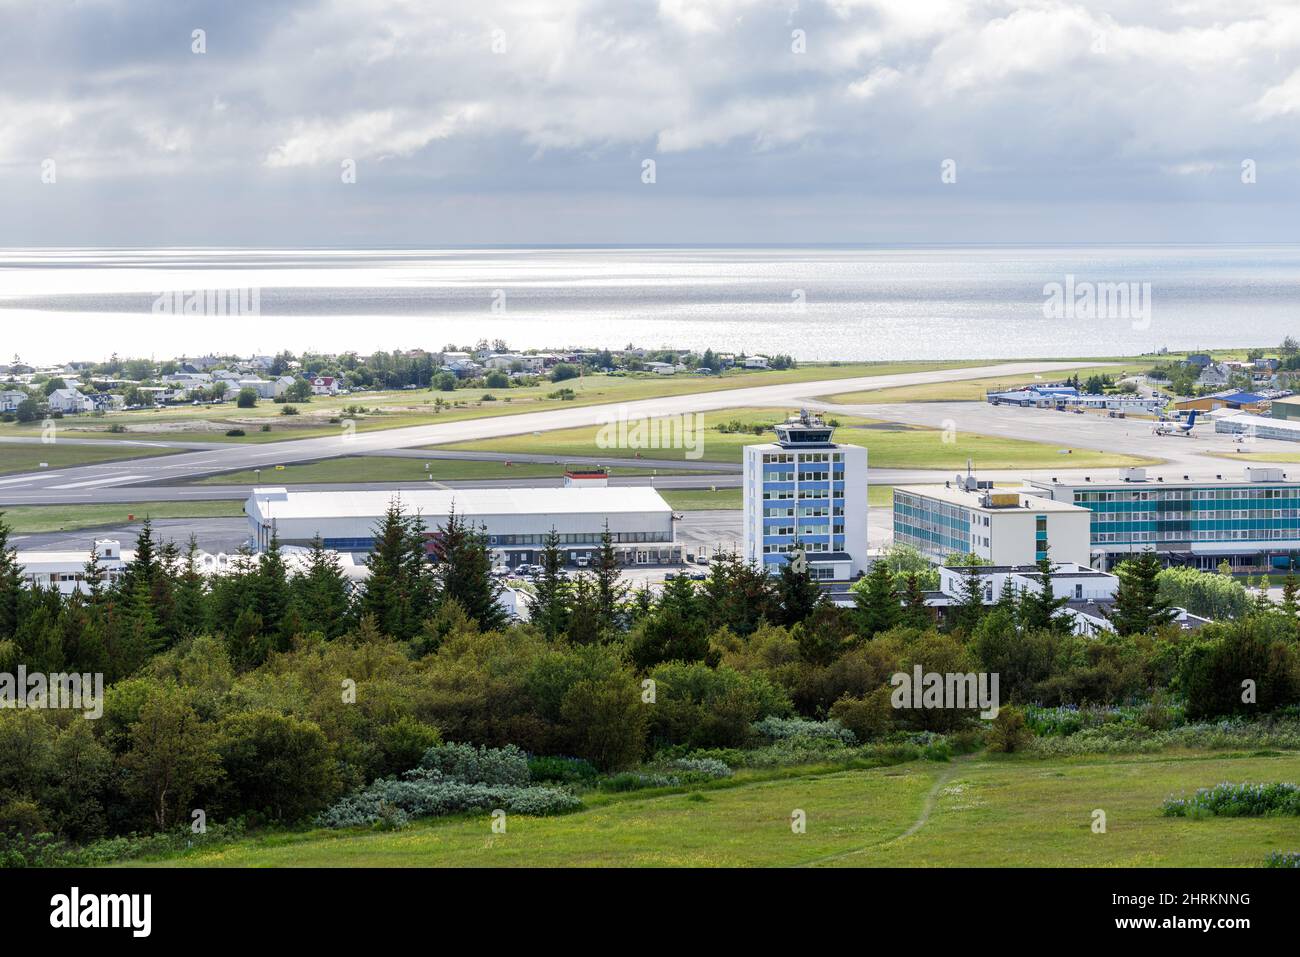 View of a small airport near the coast on a cloudy summer day Stock Photo